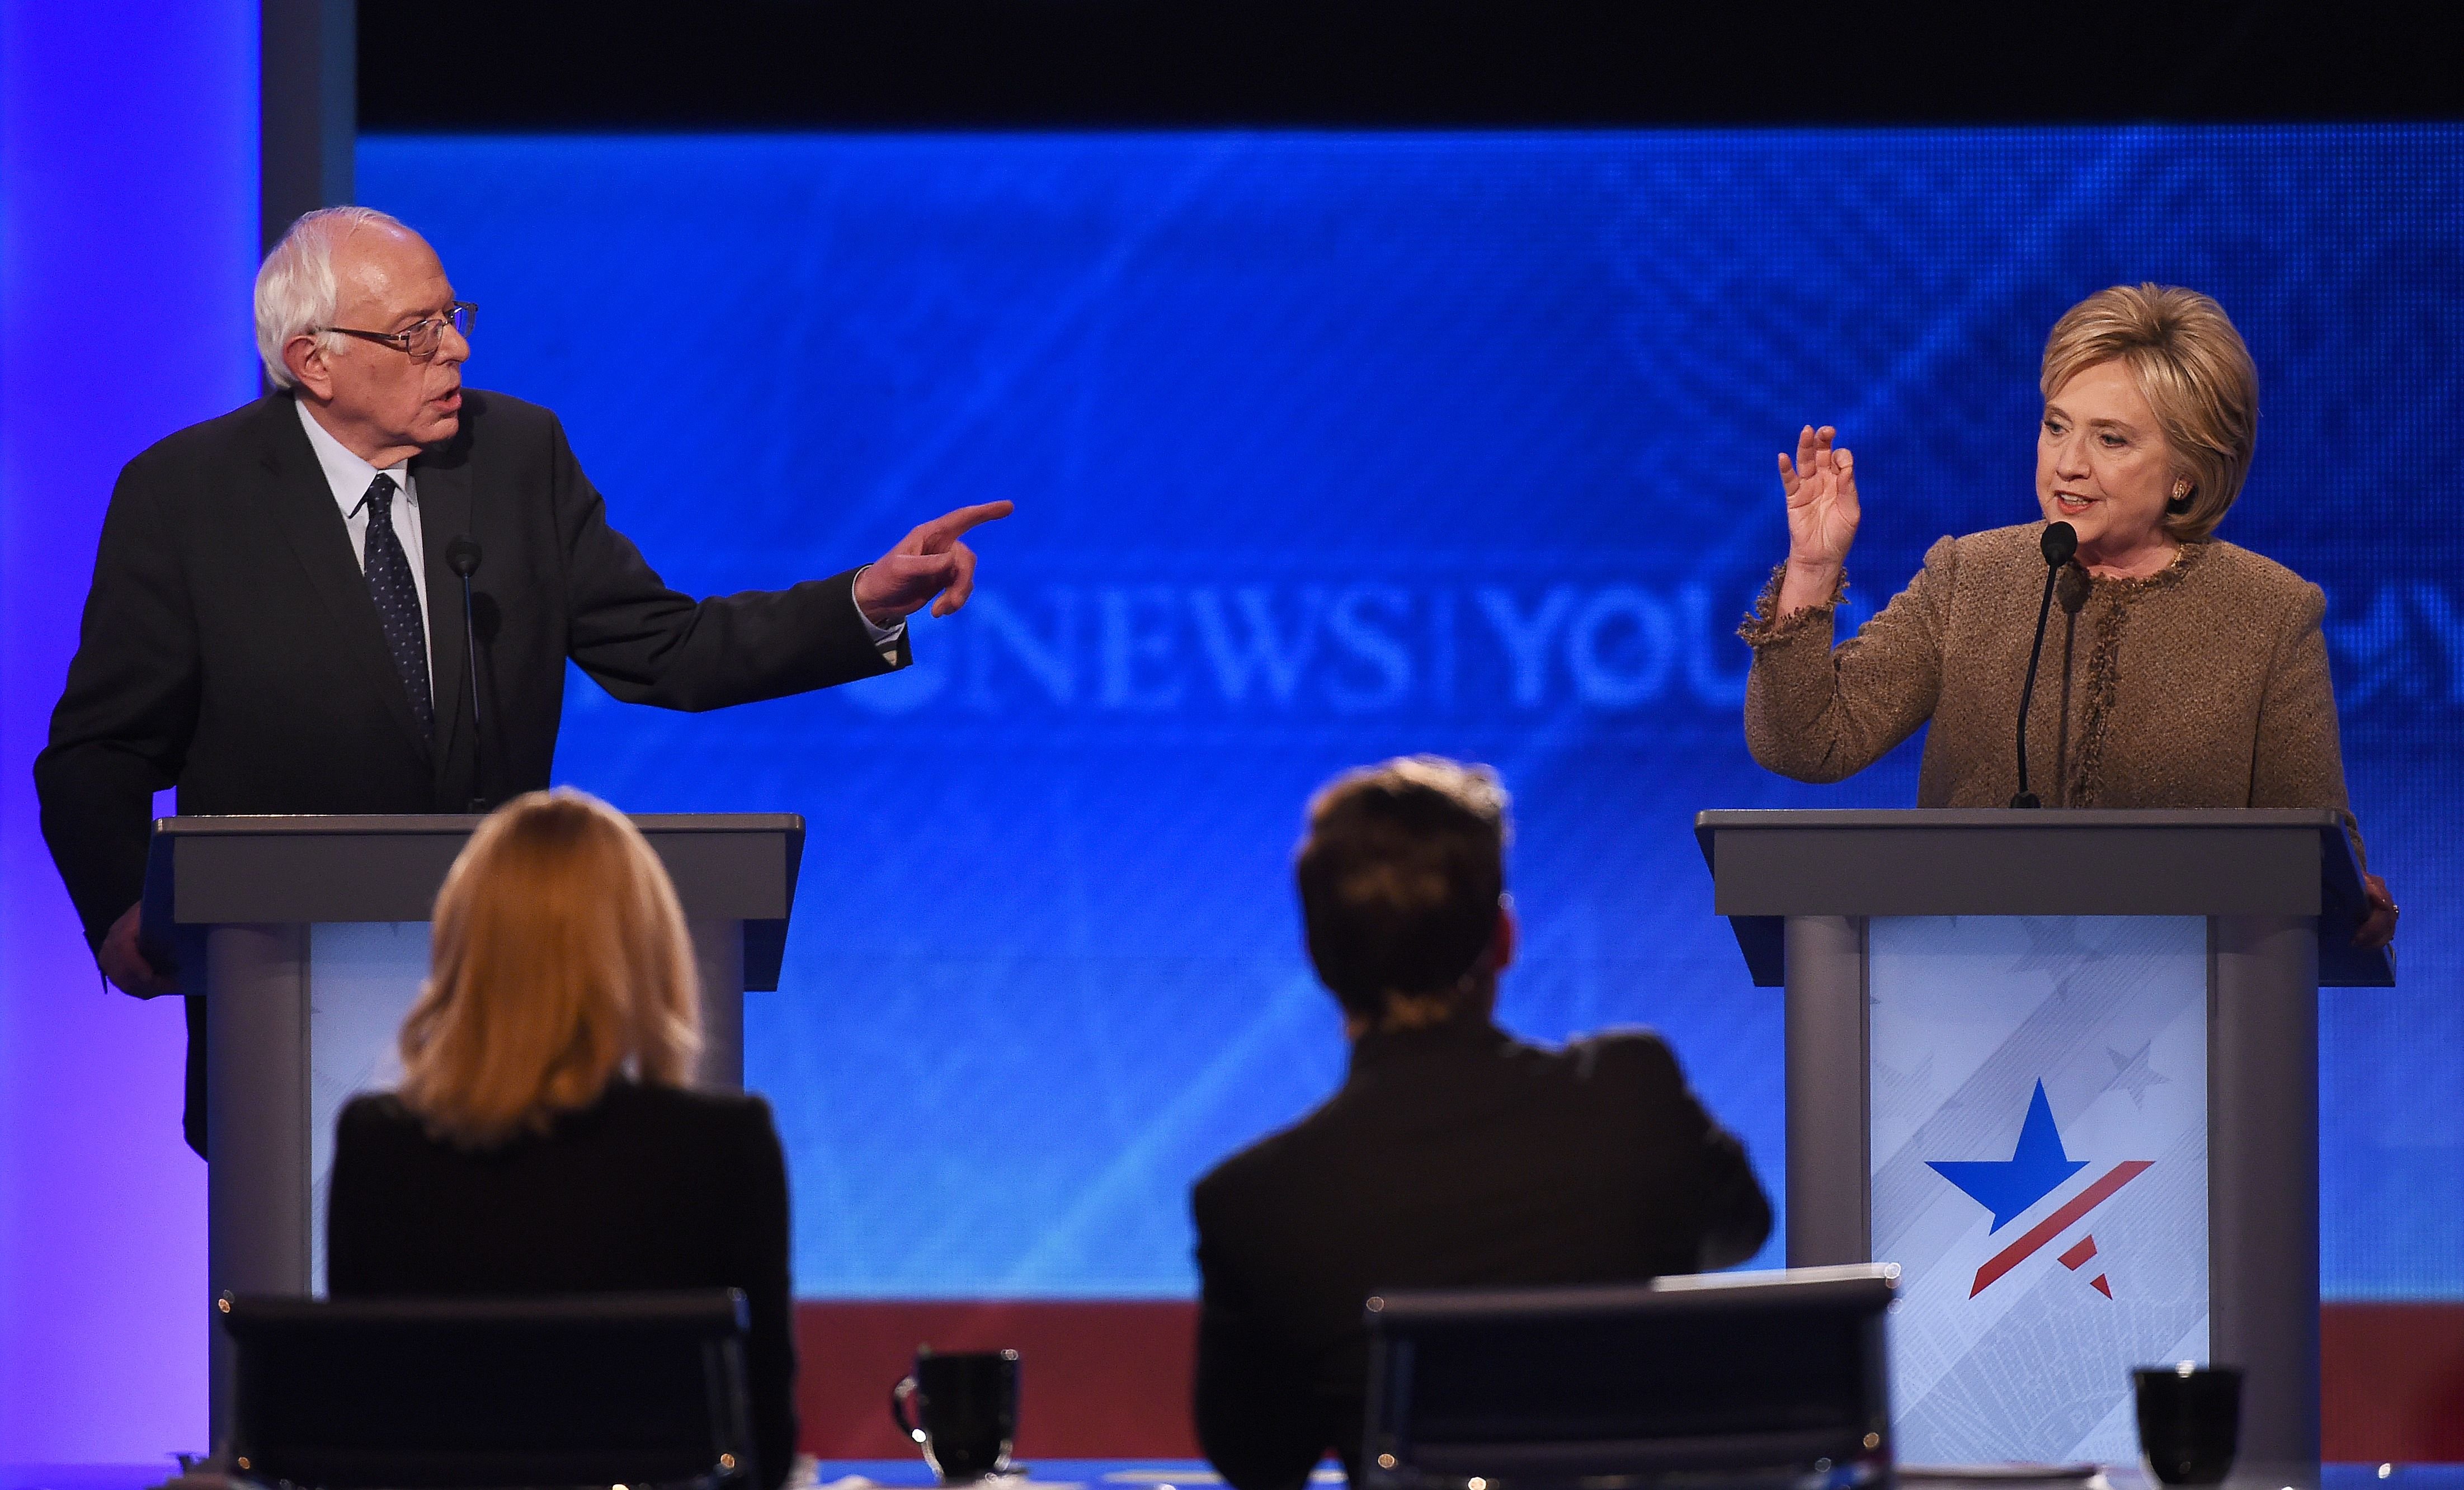 Hillary Clinton, right, and Bernie Sanders participate in the Democratic Presidential Debate hosted by ABC News at Saint Anselm College in Manchester, New Hampshire, on Dec. 19, 2015. (Jewel Samad—AFP/Getty Images)